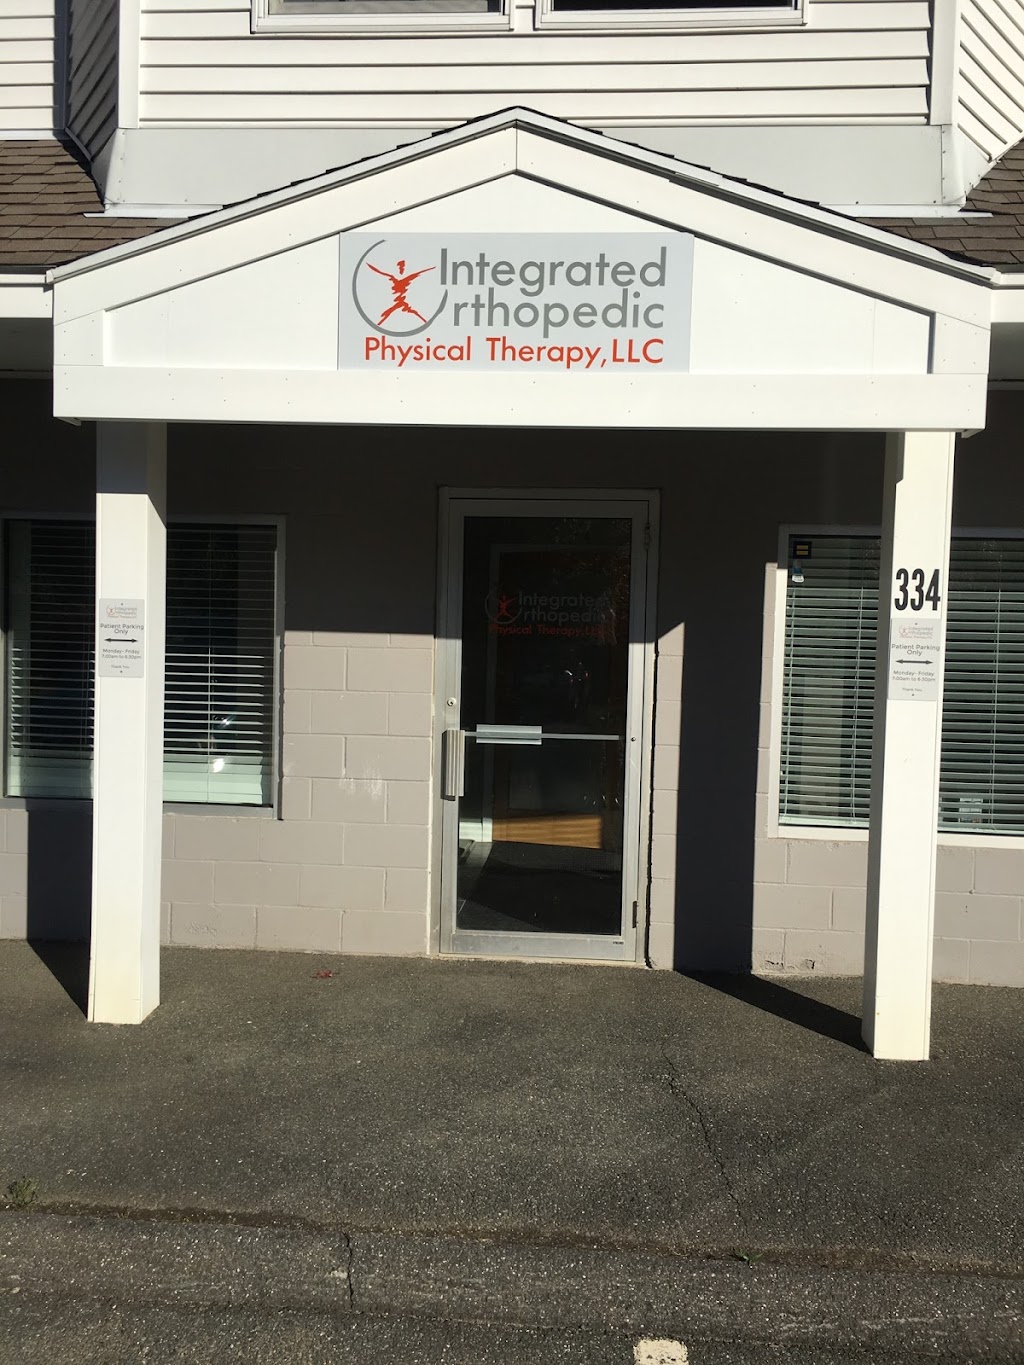 Integrated Orthopedic Physical Therapy | 334 College St, Amherst, MA 01002 | Phone: (413) 992-2131